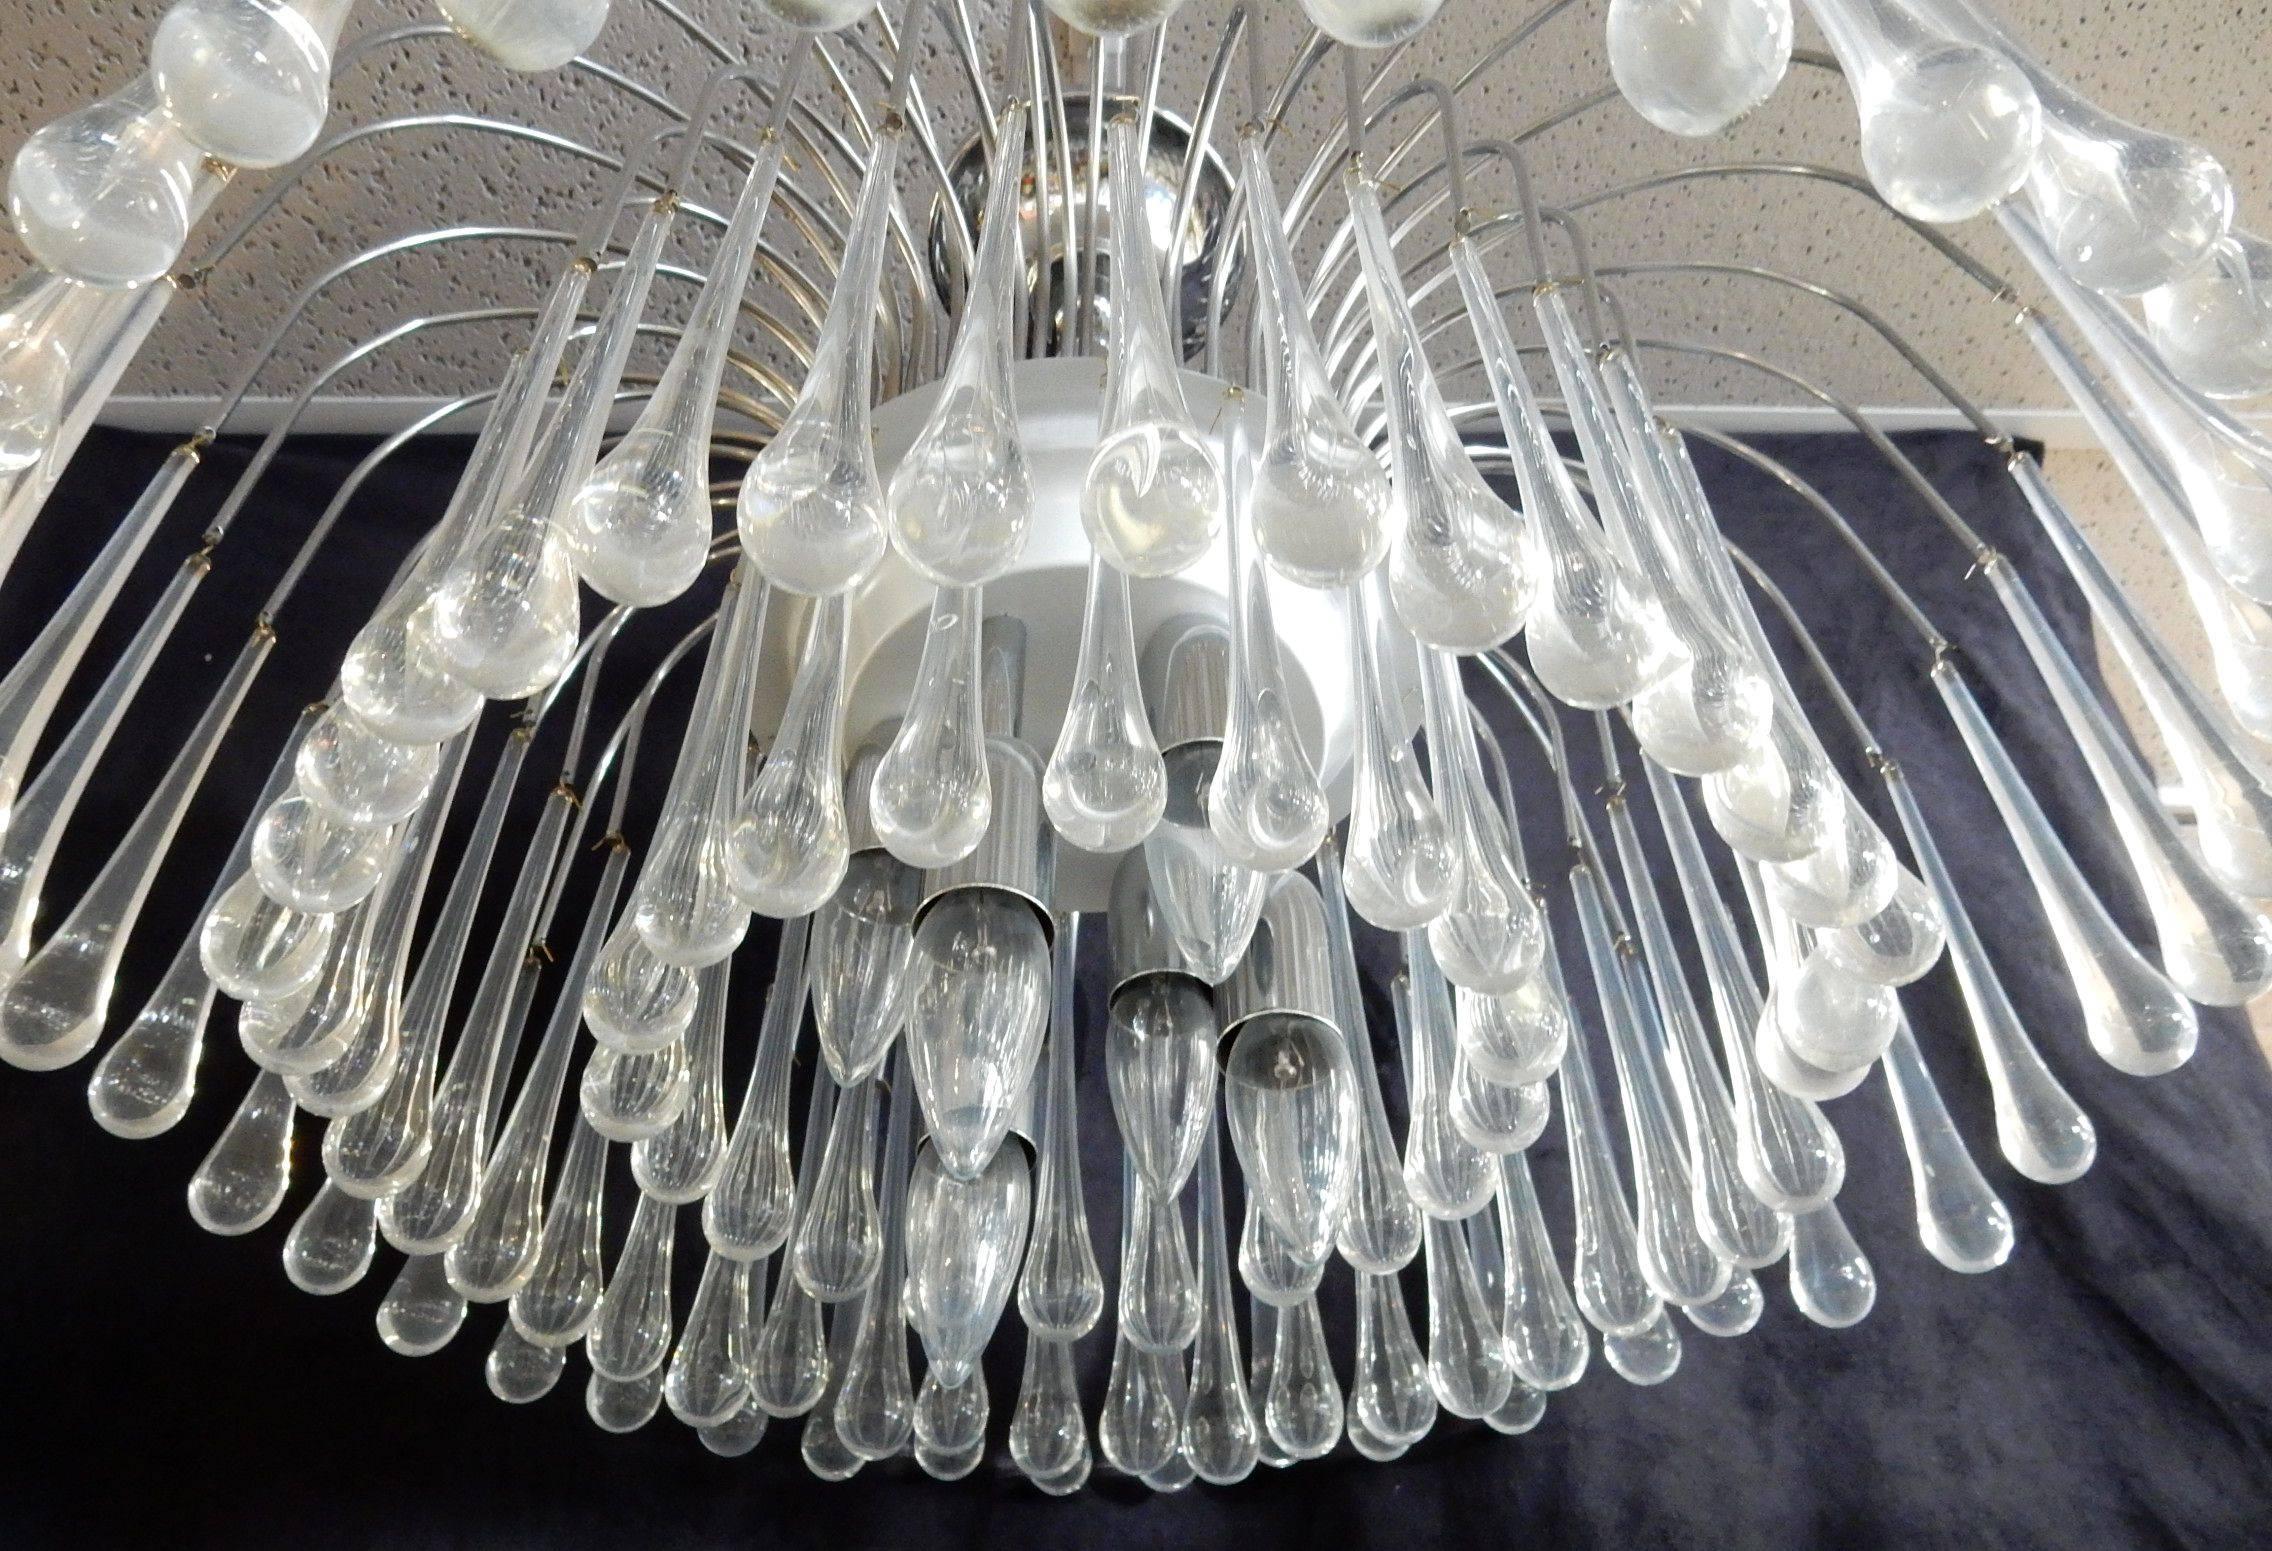 circa 1970's Italian chandelier with 100 long narrow teardrop shape crystals suspended around 5 candle bulbs.
Exceptional piece, nice quality.